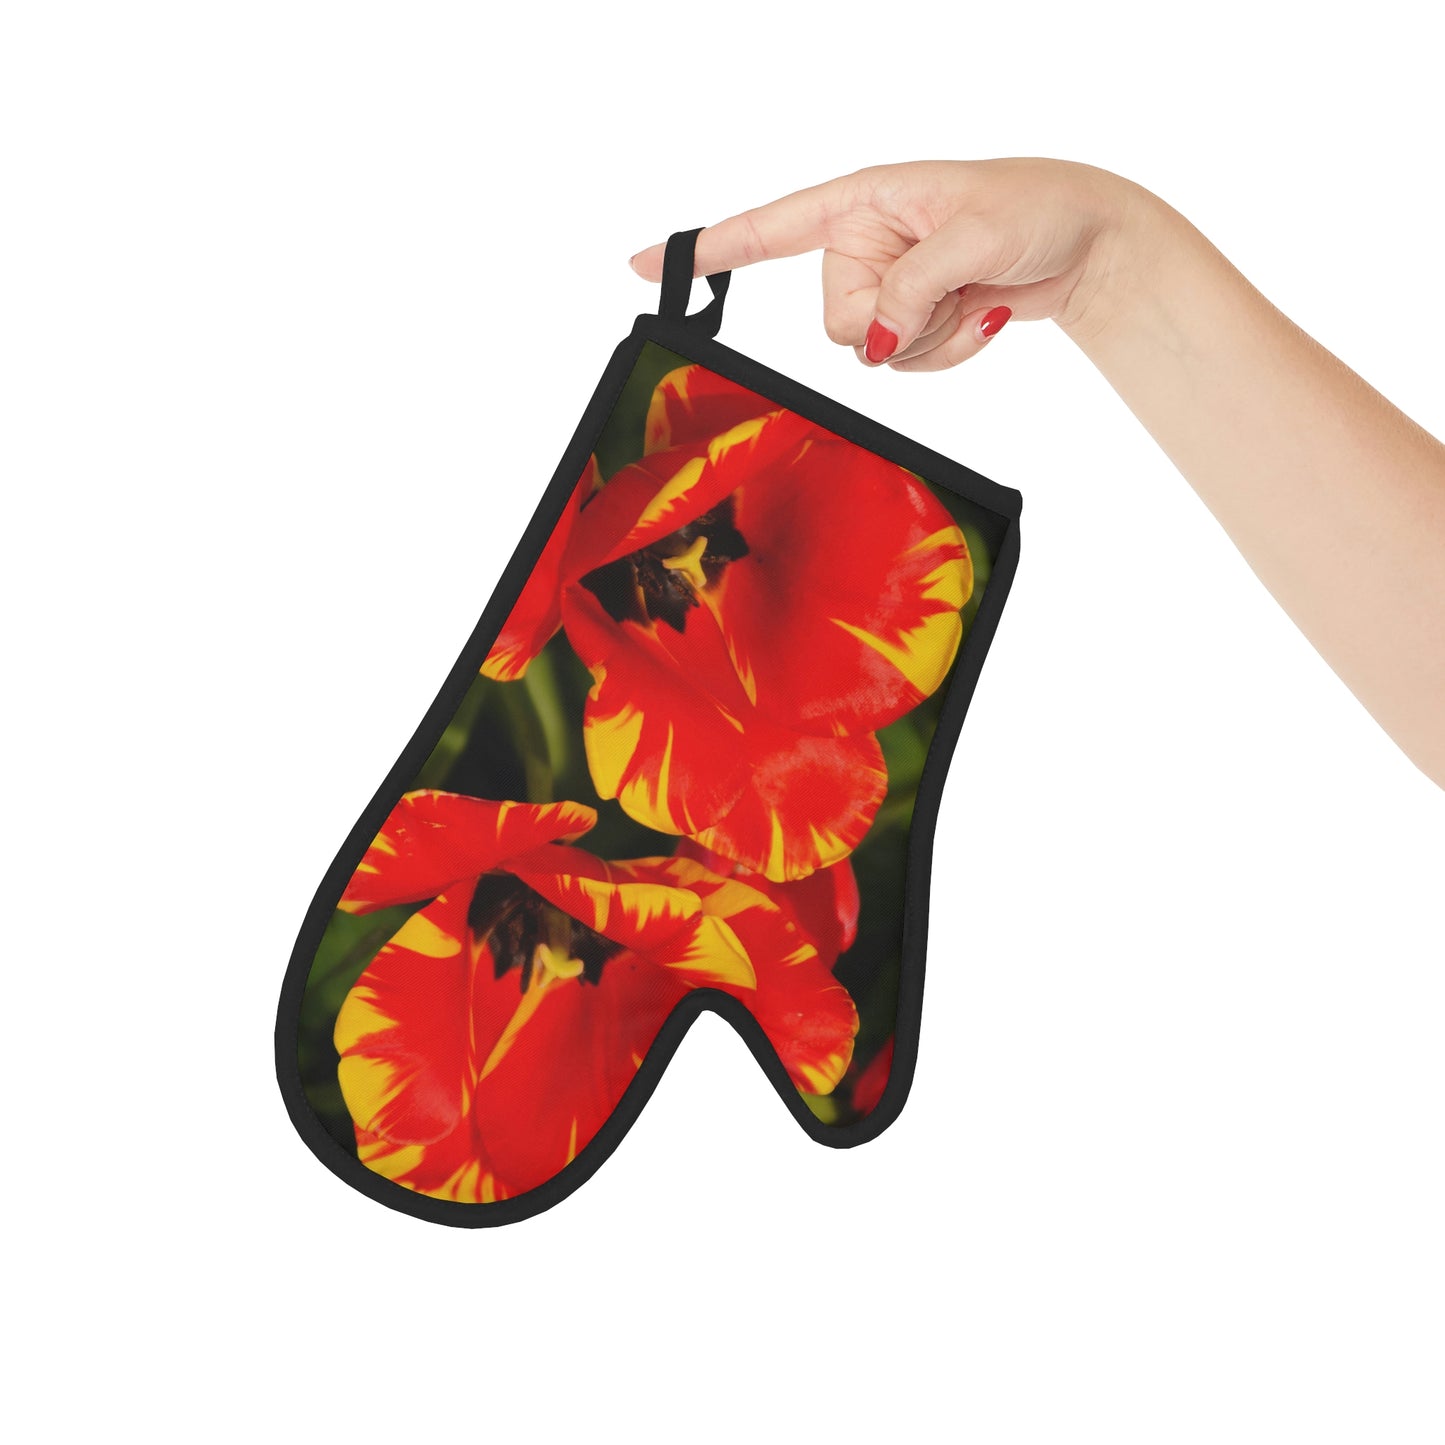 Flowers 11 Oven Glove